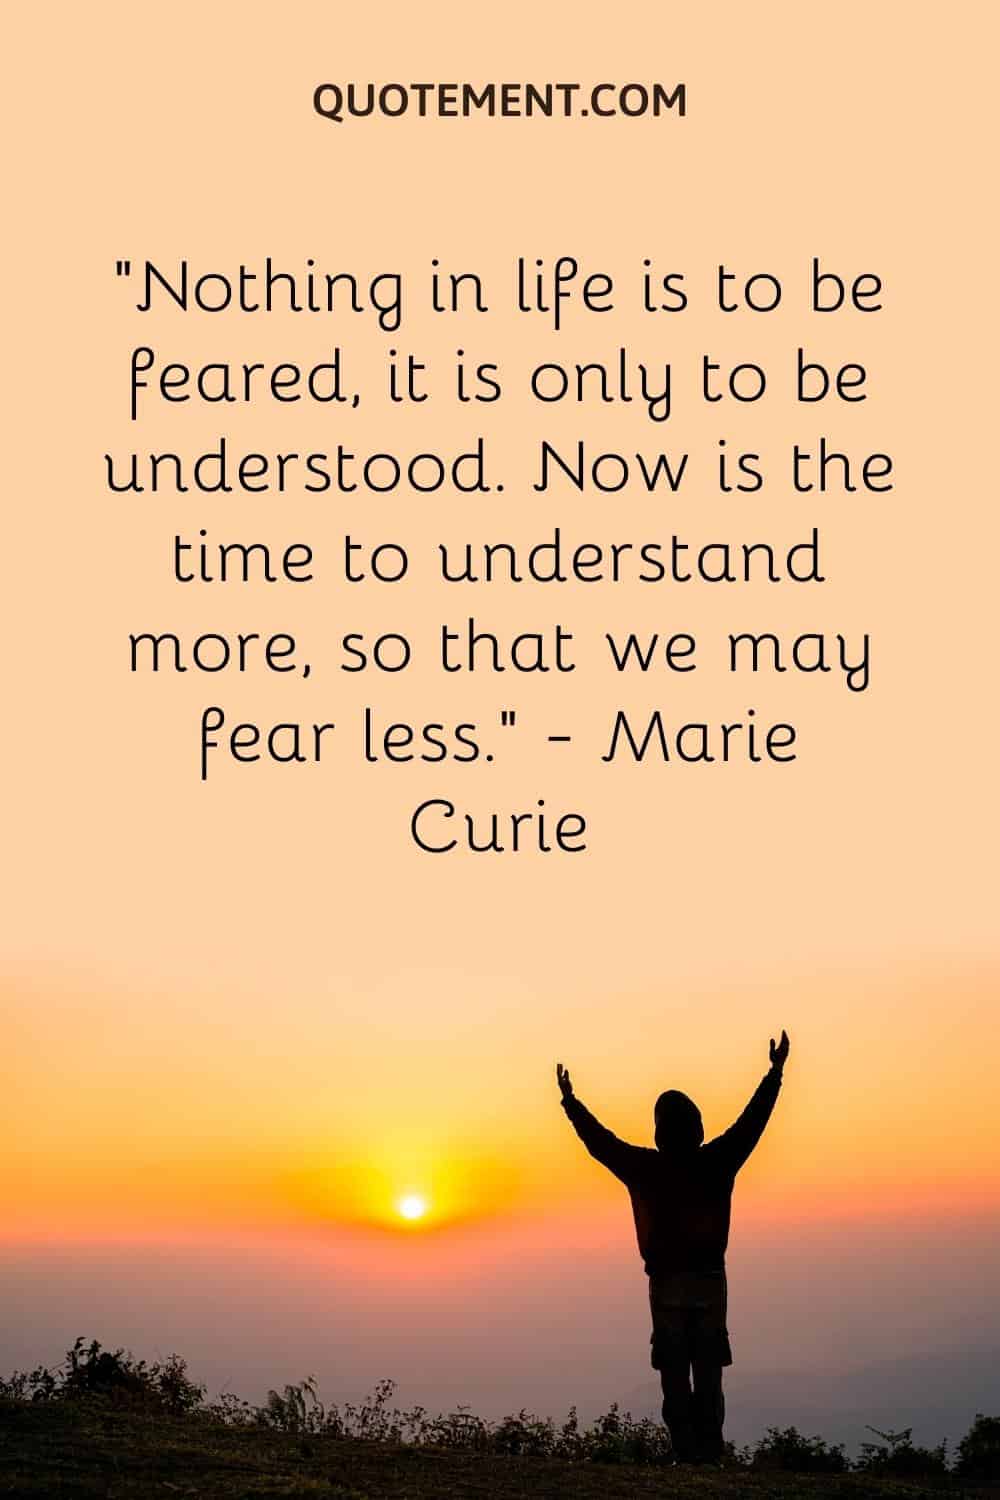 “Nothing in life is to be feared, it is only to be understood. Now is the time to understand more, so that we may fear less.” — Marie Curie